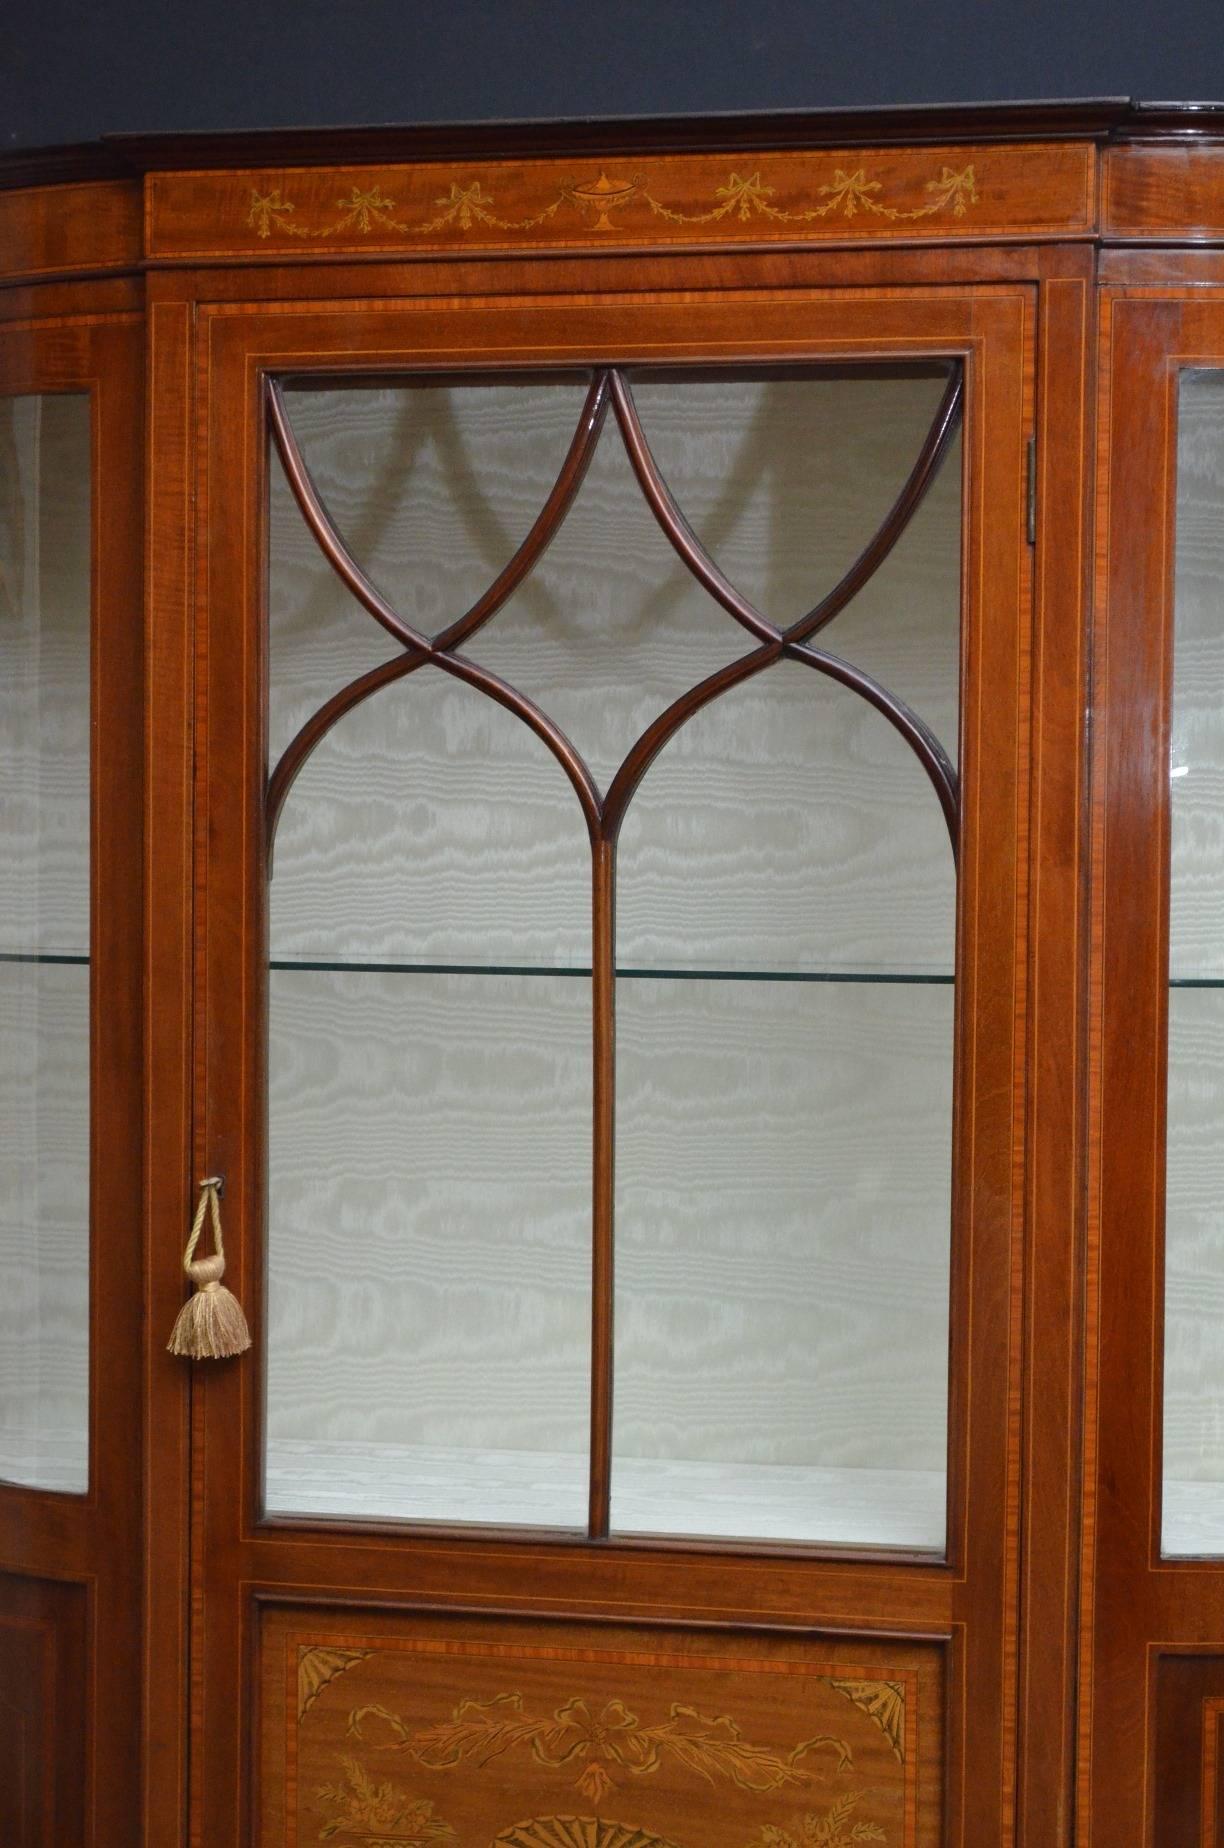 Sn3792 stunning Edwardian, mahogany and inlaid display cabinet, having moulded cornice above swags and ribbon ties inlaid frieze, astragal glazed door with marquetry panel below enclosing two shelves, all flanked by glazed, bowed sides with